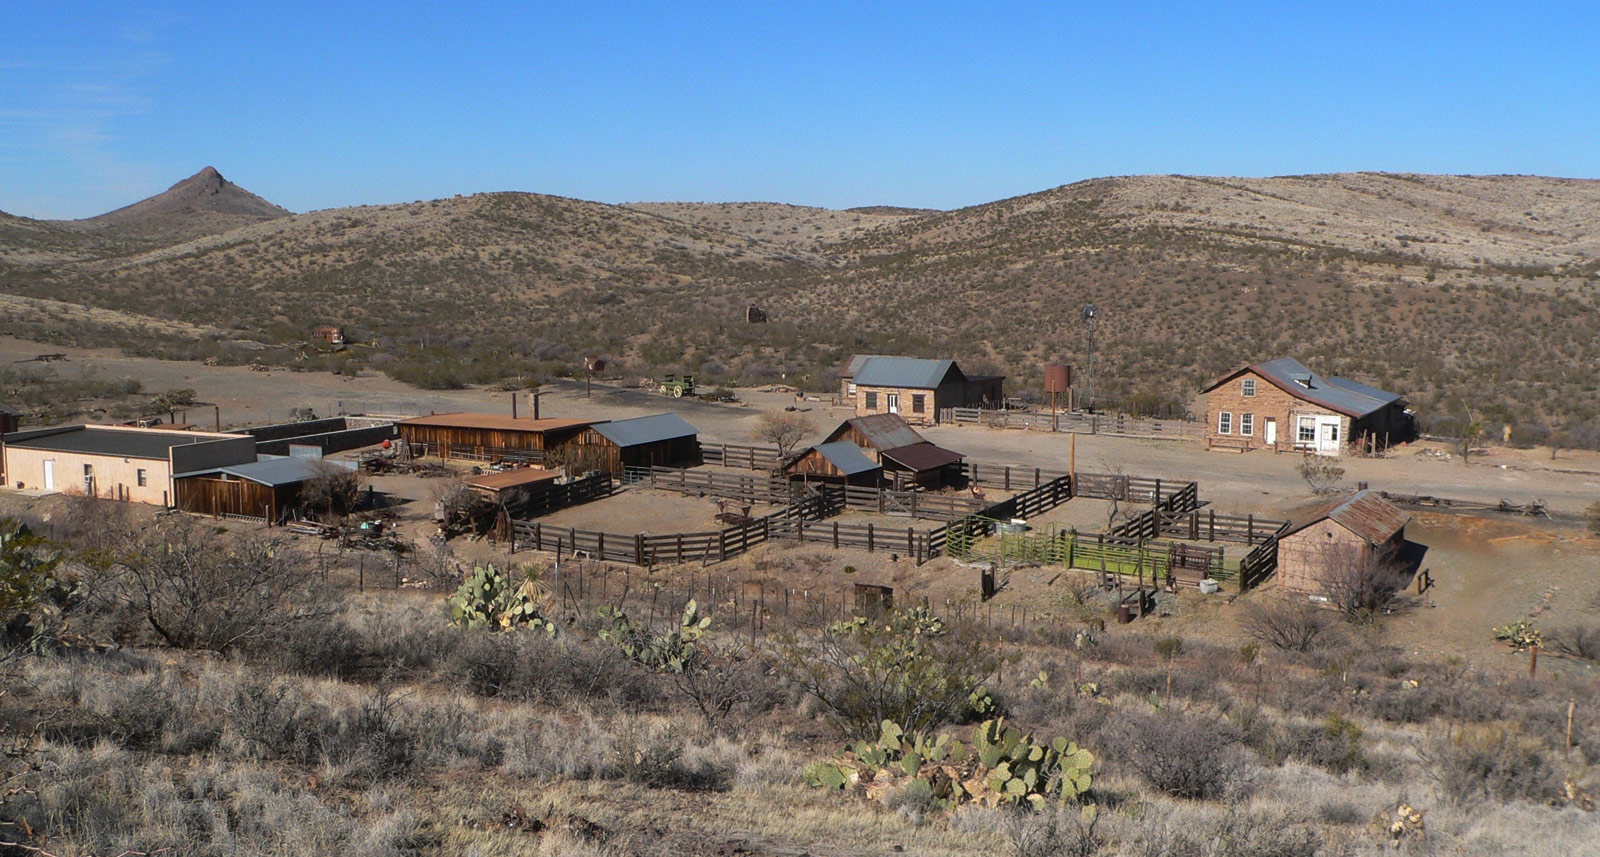 Ranch in the state of New Mexico